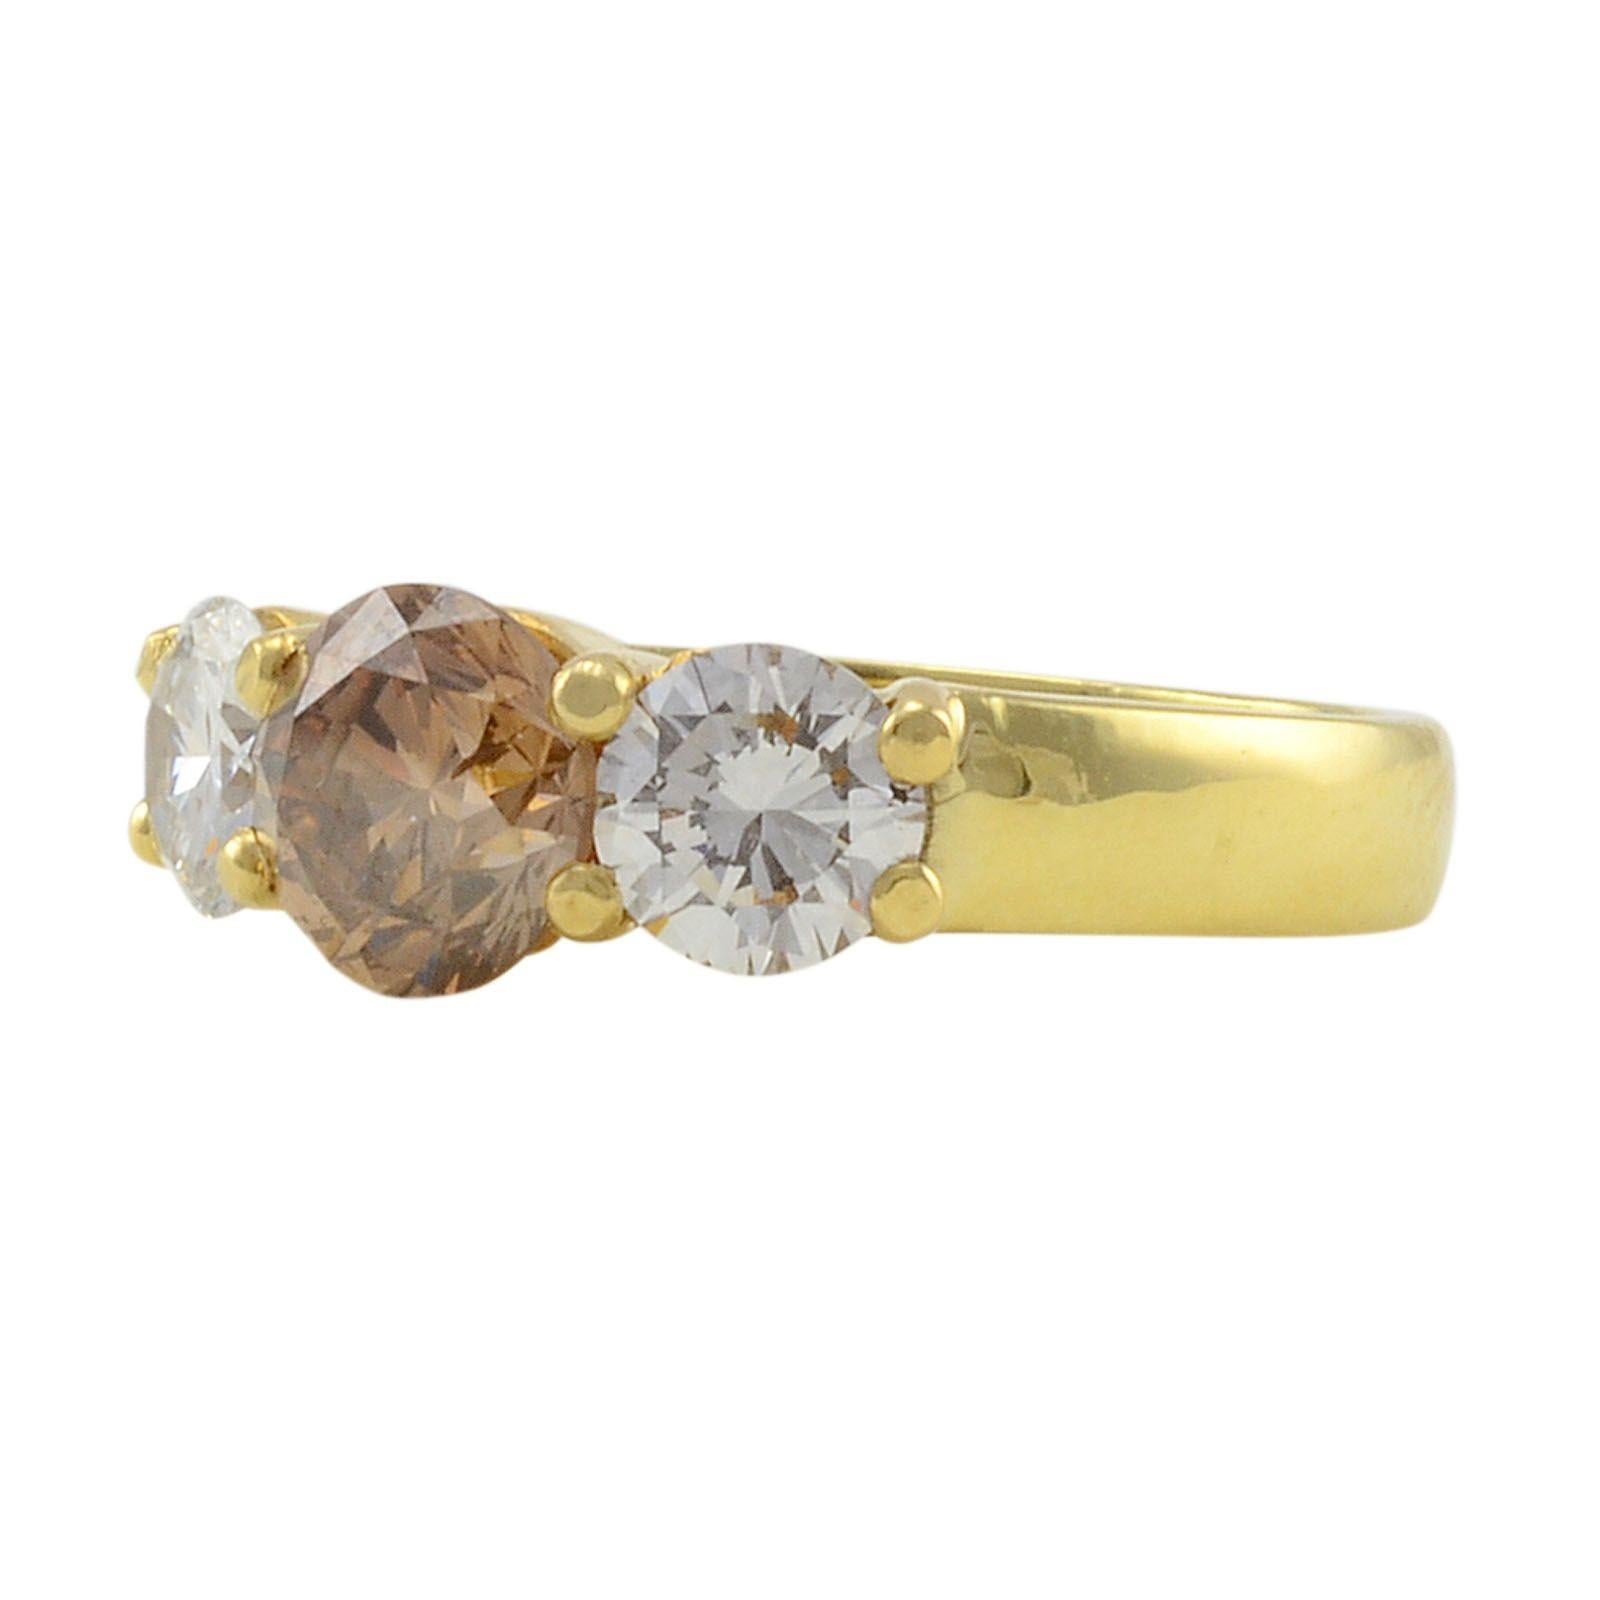 Estate 18K yellow gold 1.35 carat light brown diamond ring. This ring has a center round brilliant diamond at 1.35 carats and two side round brilliant diamonds, one at 0.61 carats and one at 0.59 carats, SI1 clarity H-I color. This estate diamond